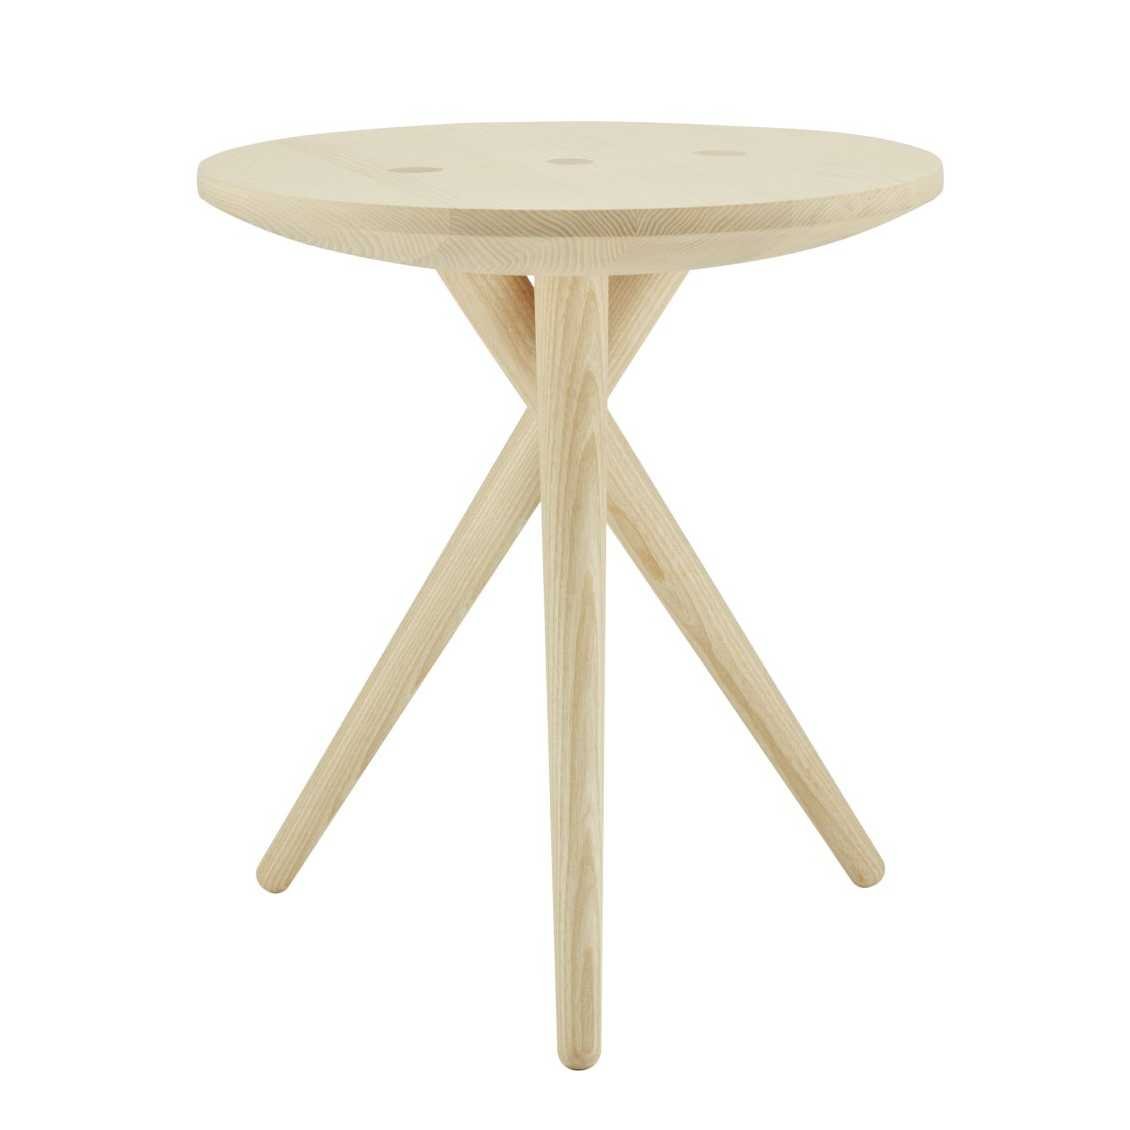 THONET 1025 side table